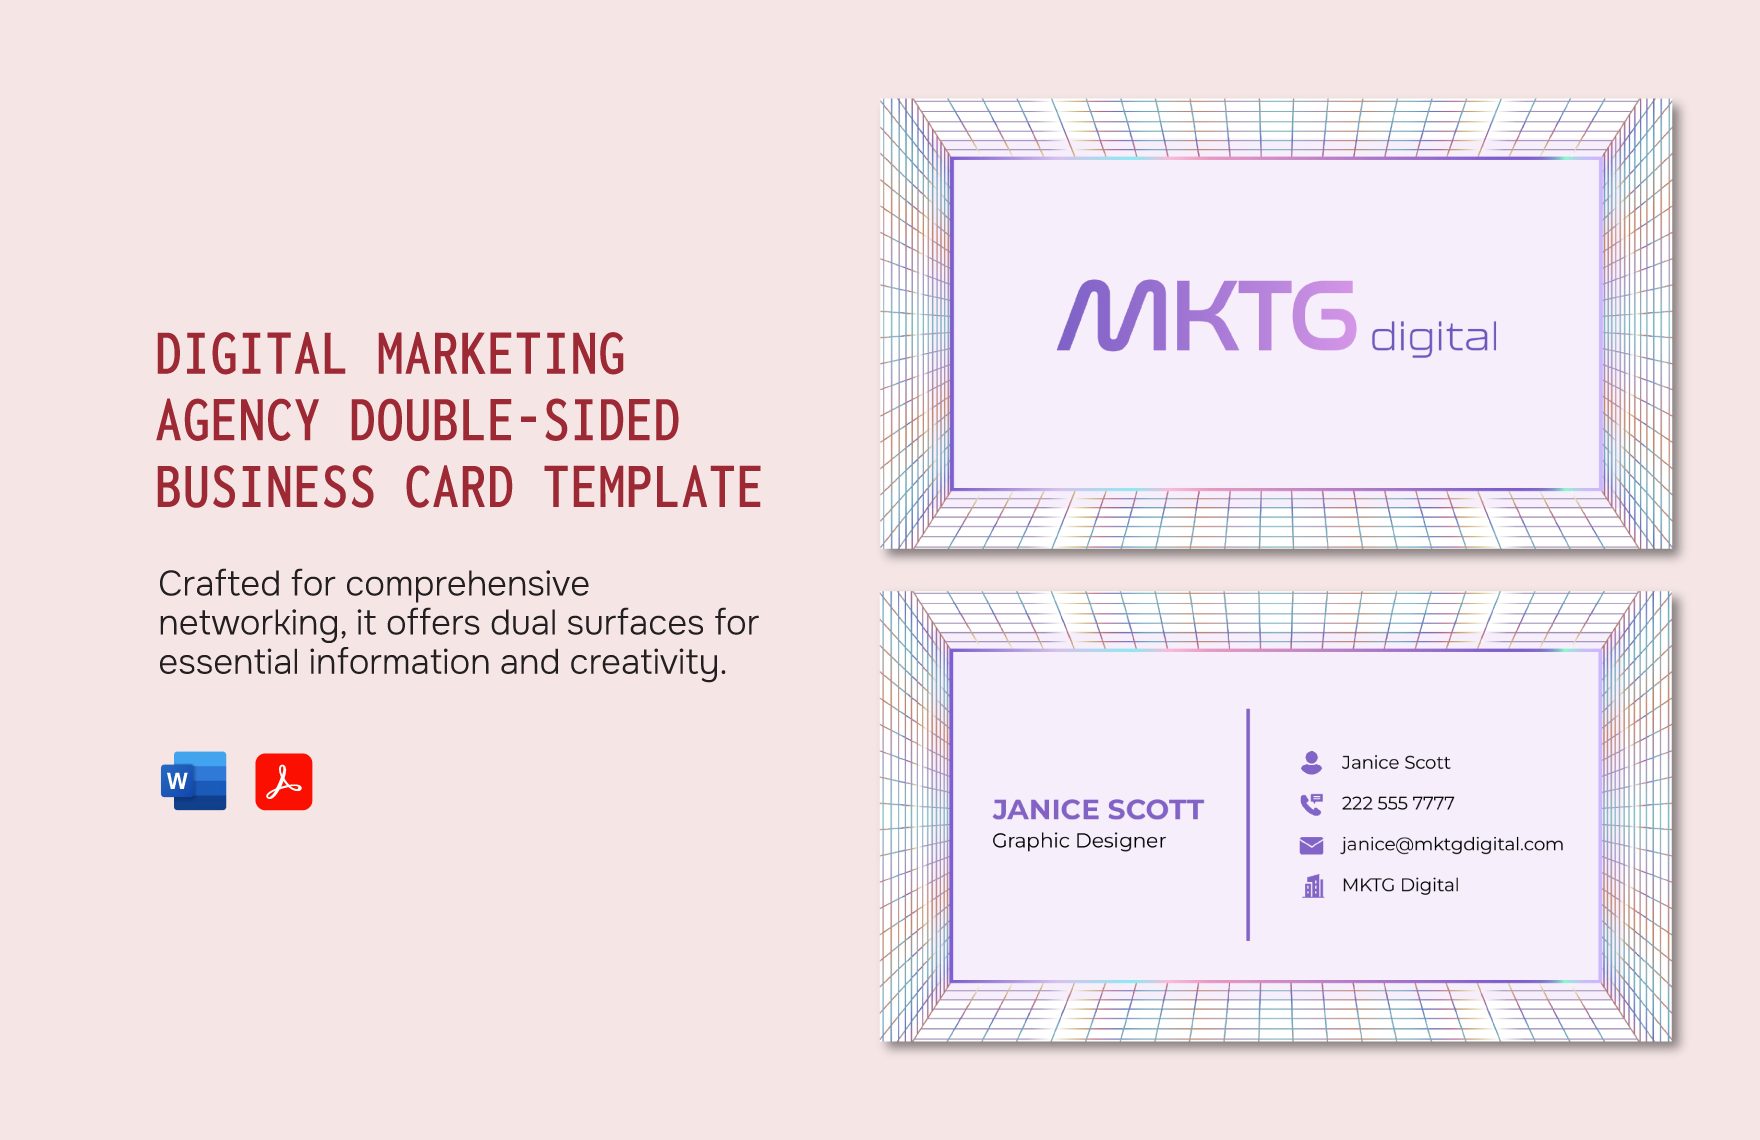 Digital Marketing Agency Double-Sided Business Card Template